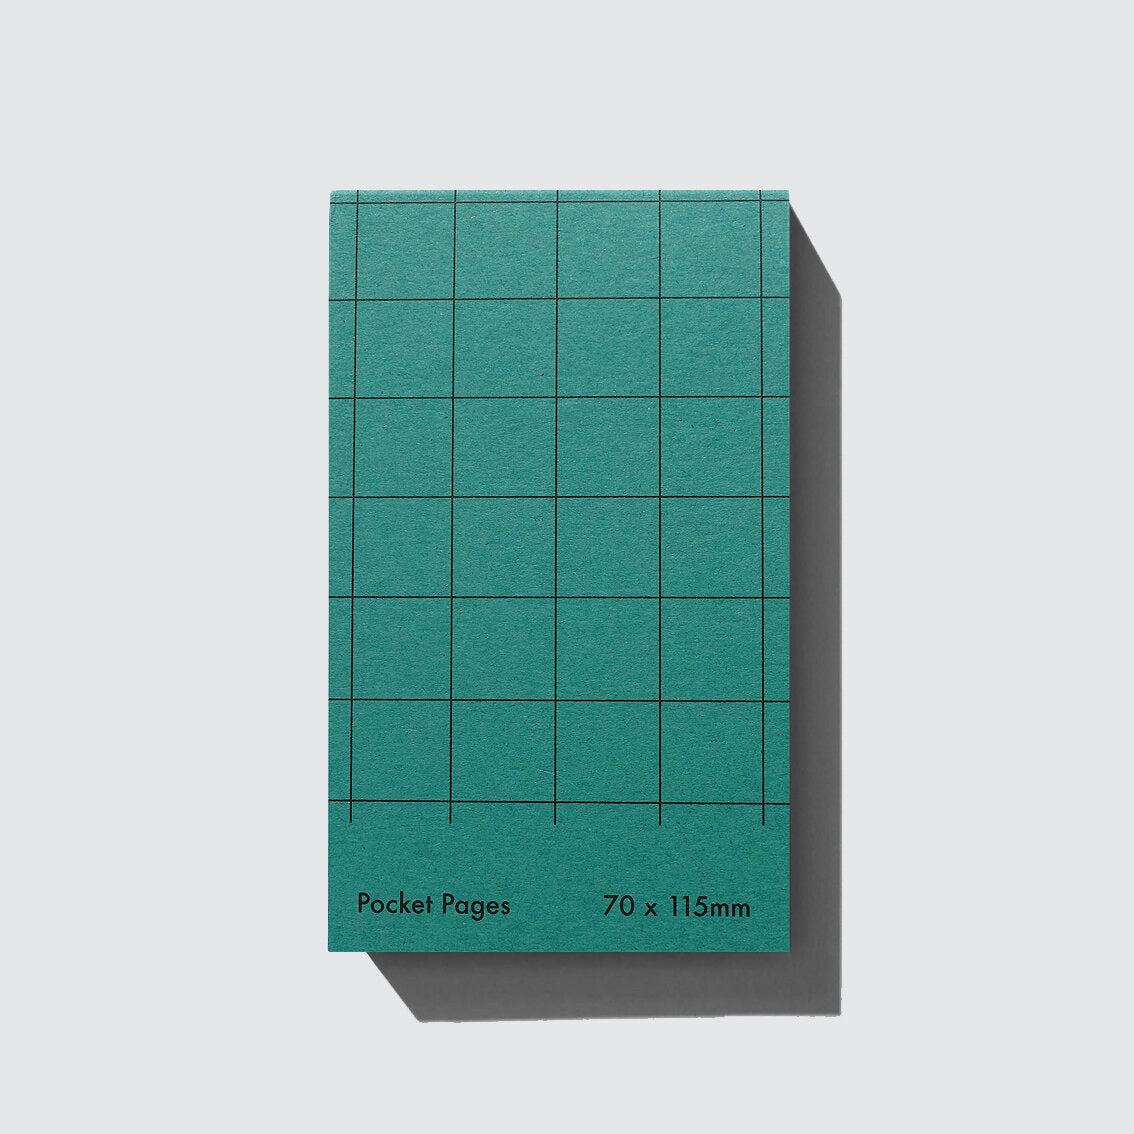 POCKET PAGES (FOREST)